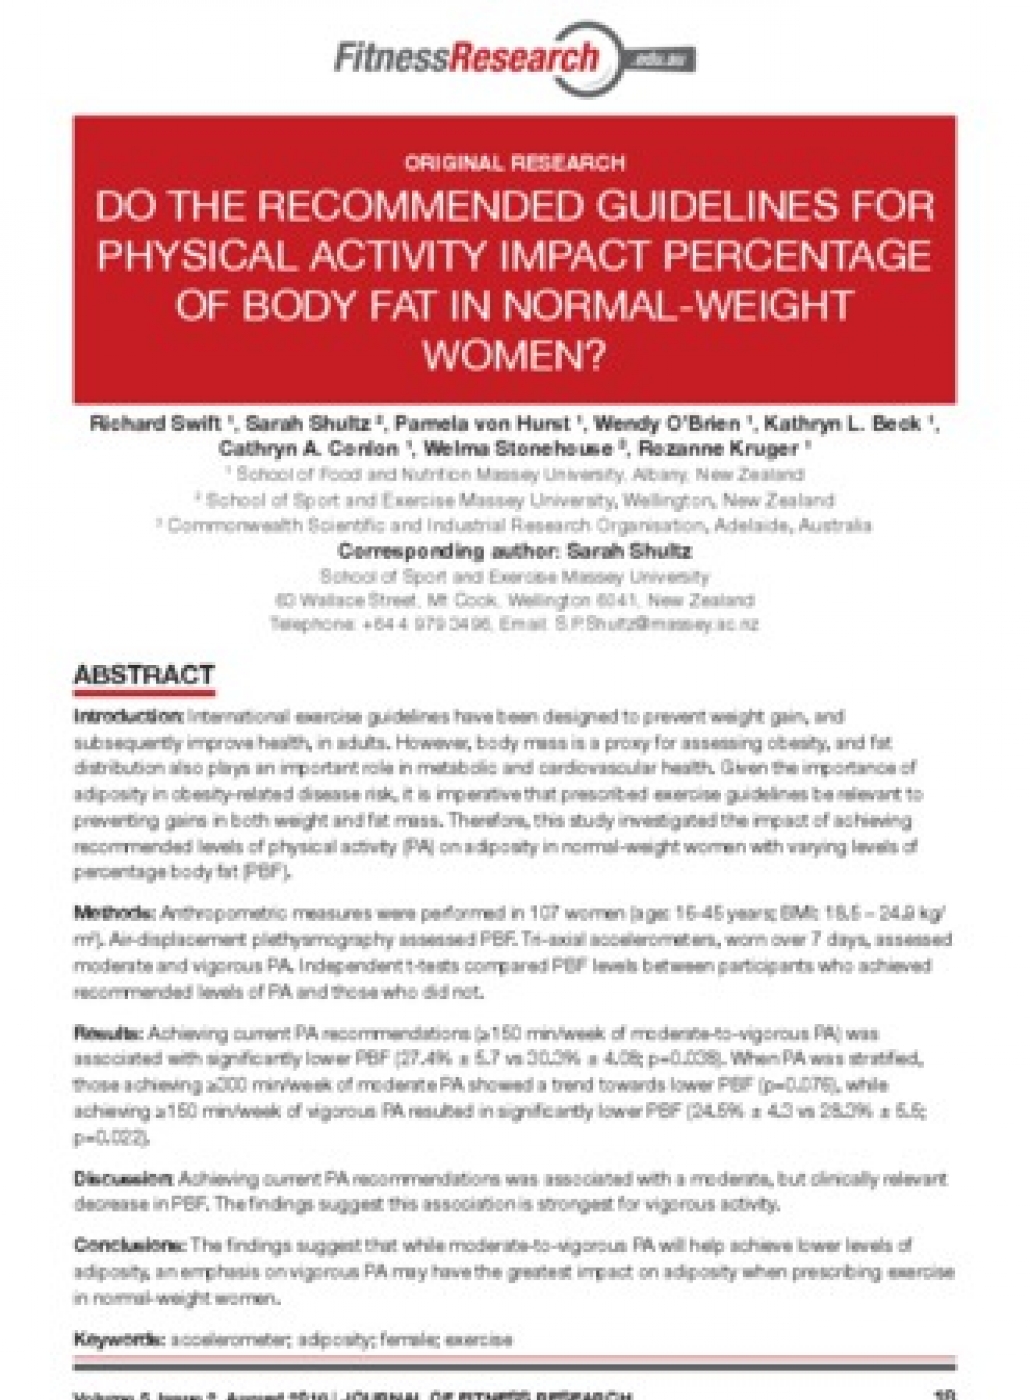 Do the recommended guidelines for physical activity impact percentage of body fat in normal  weight woman?